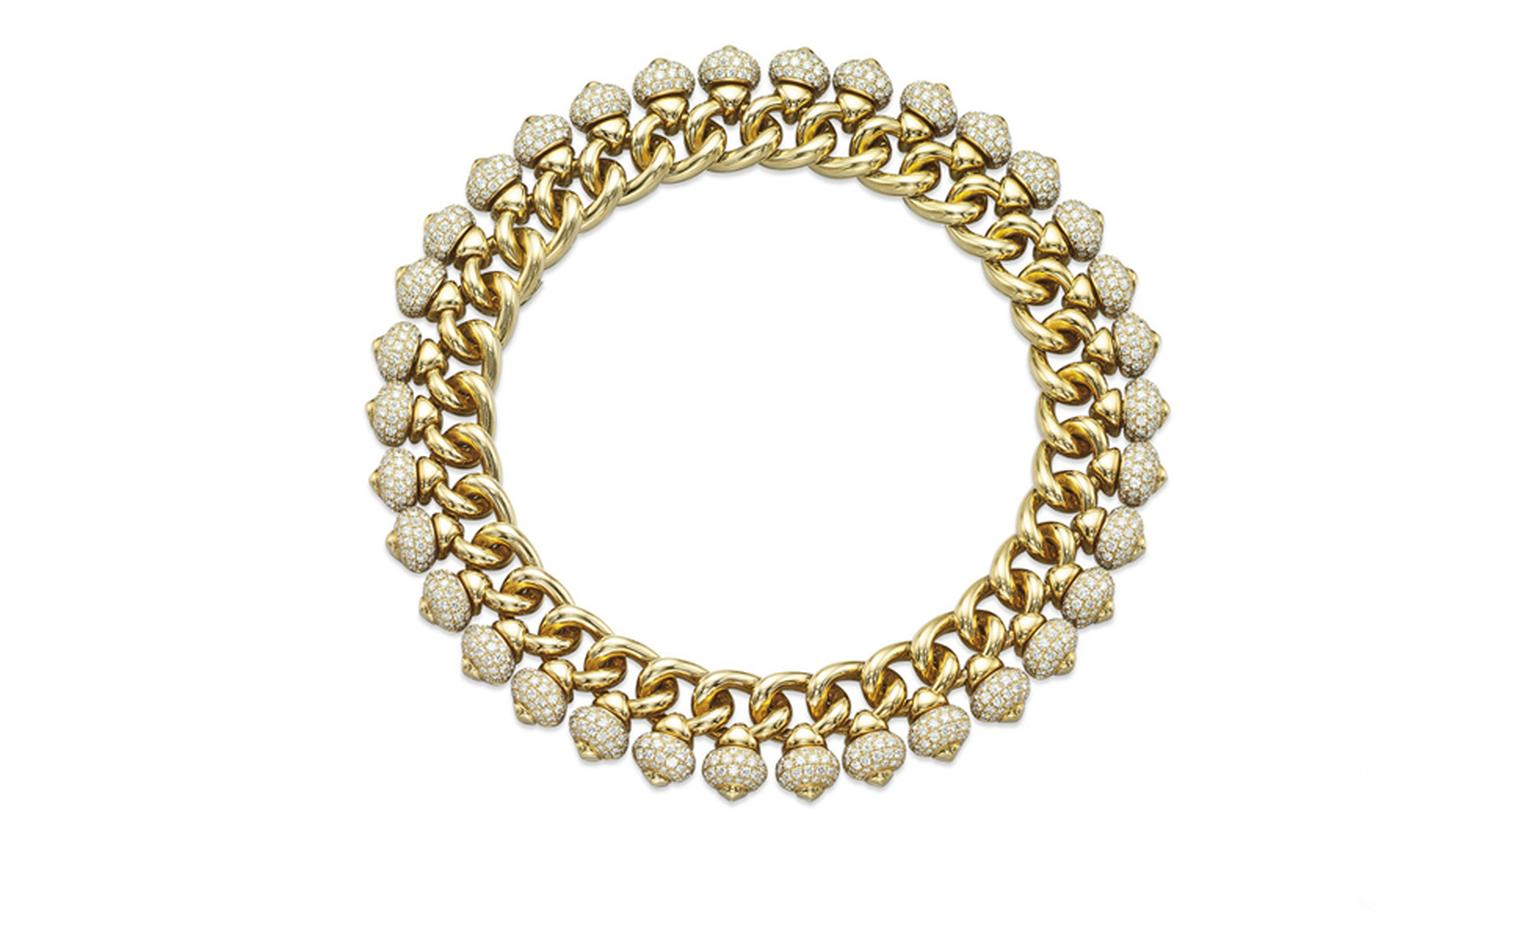 A diamond and yellow gold necklace, by Bulgari. Estimate: US$ 70,000-90,000